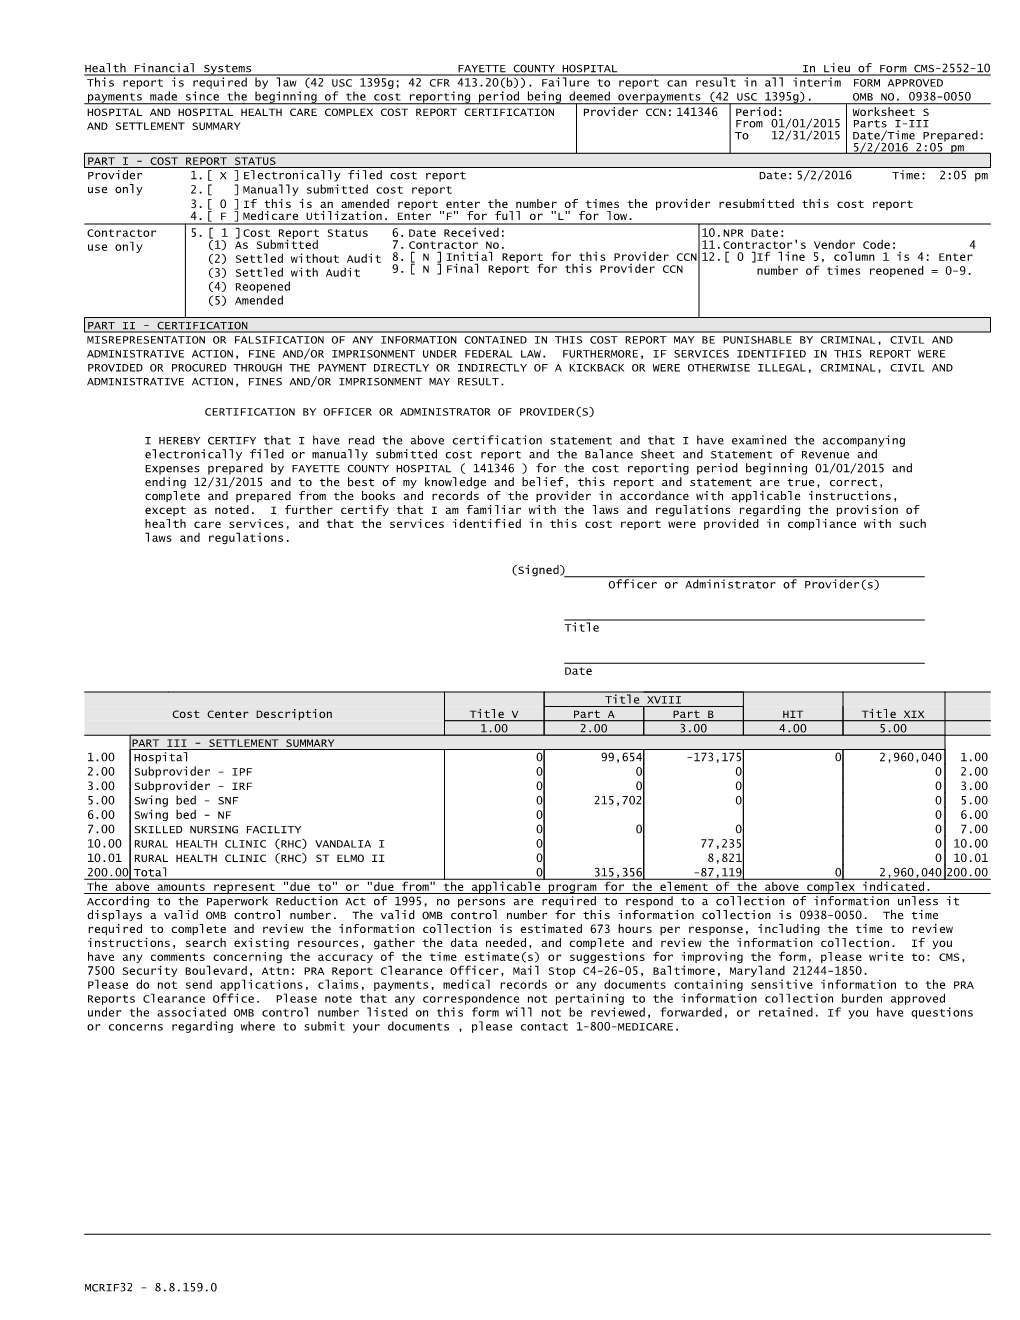 In Lieu of Form CMS-2552-10 Health Financial Systems FORM